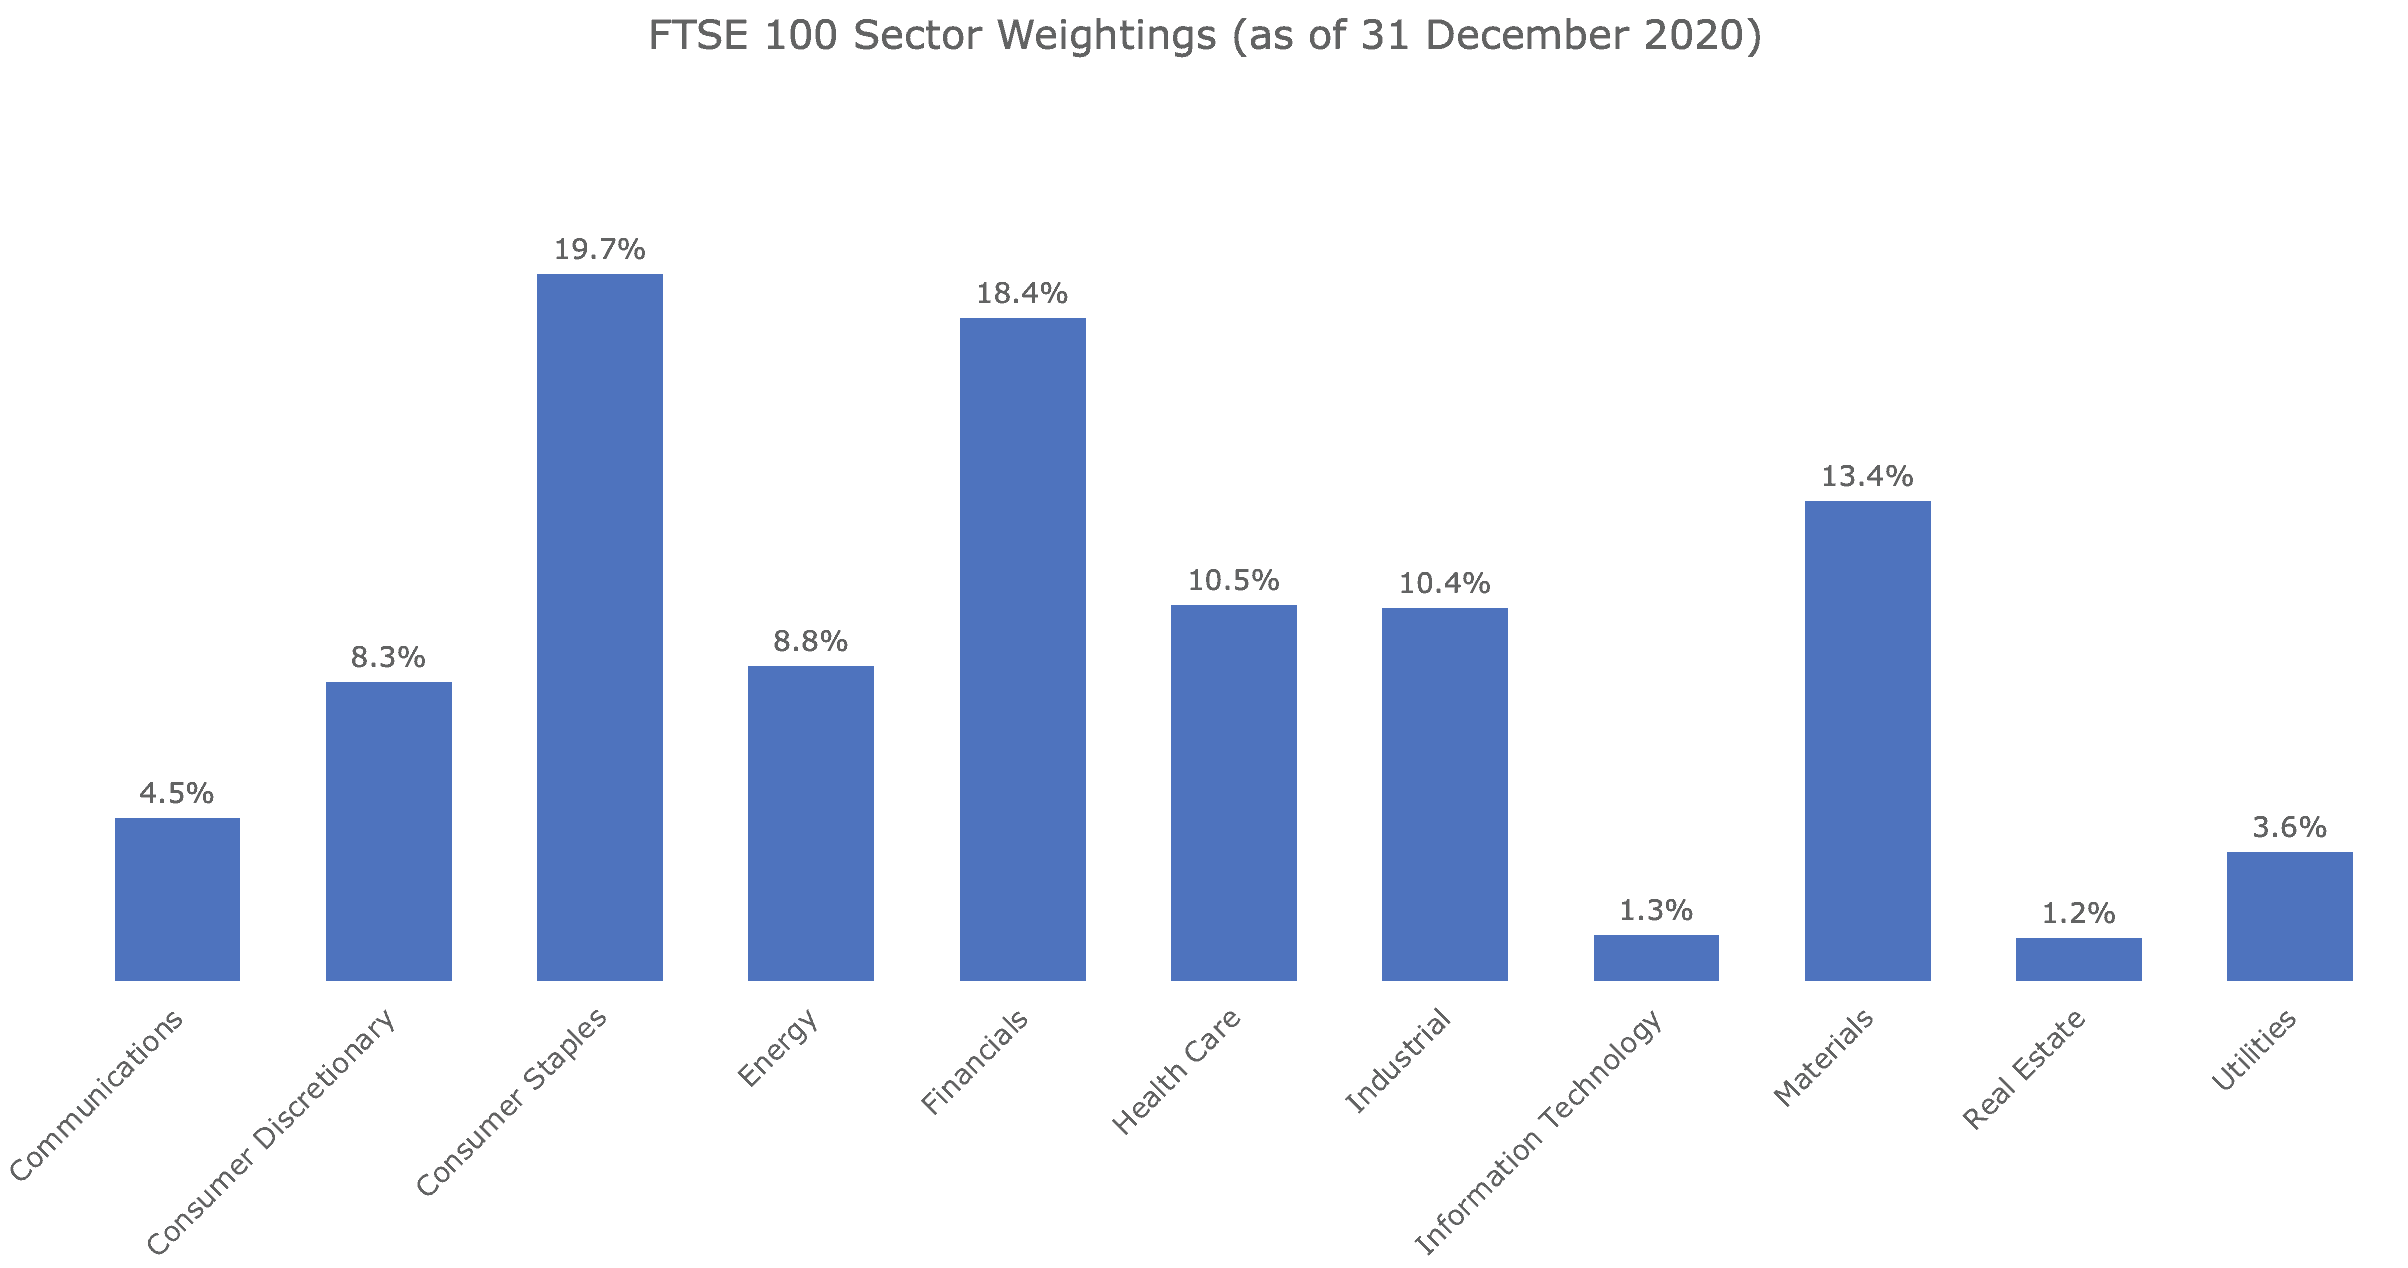 A chart showing FTSE 100 sector weightings